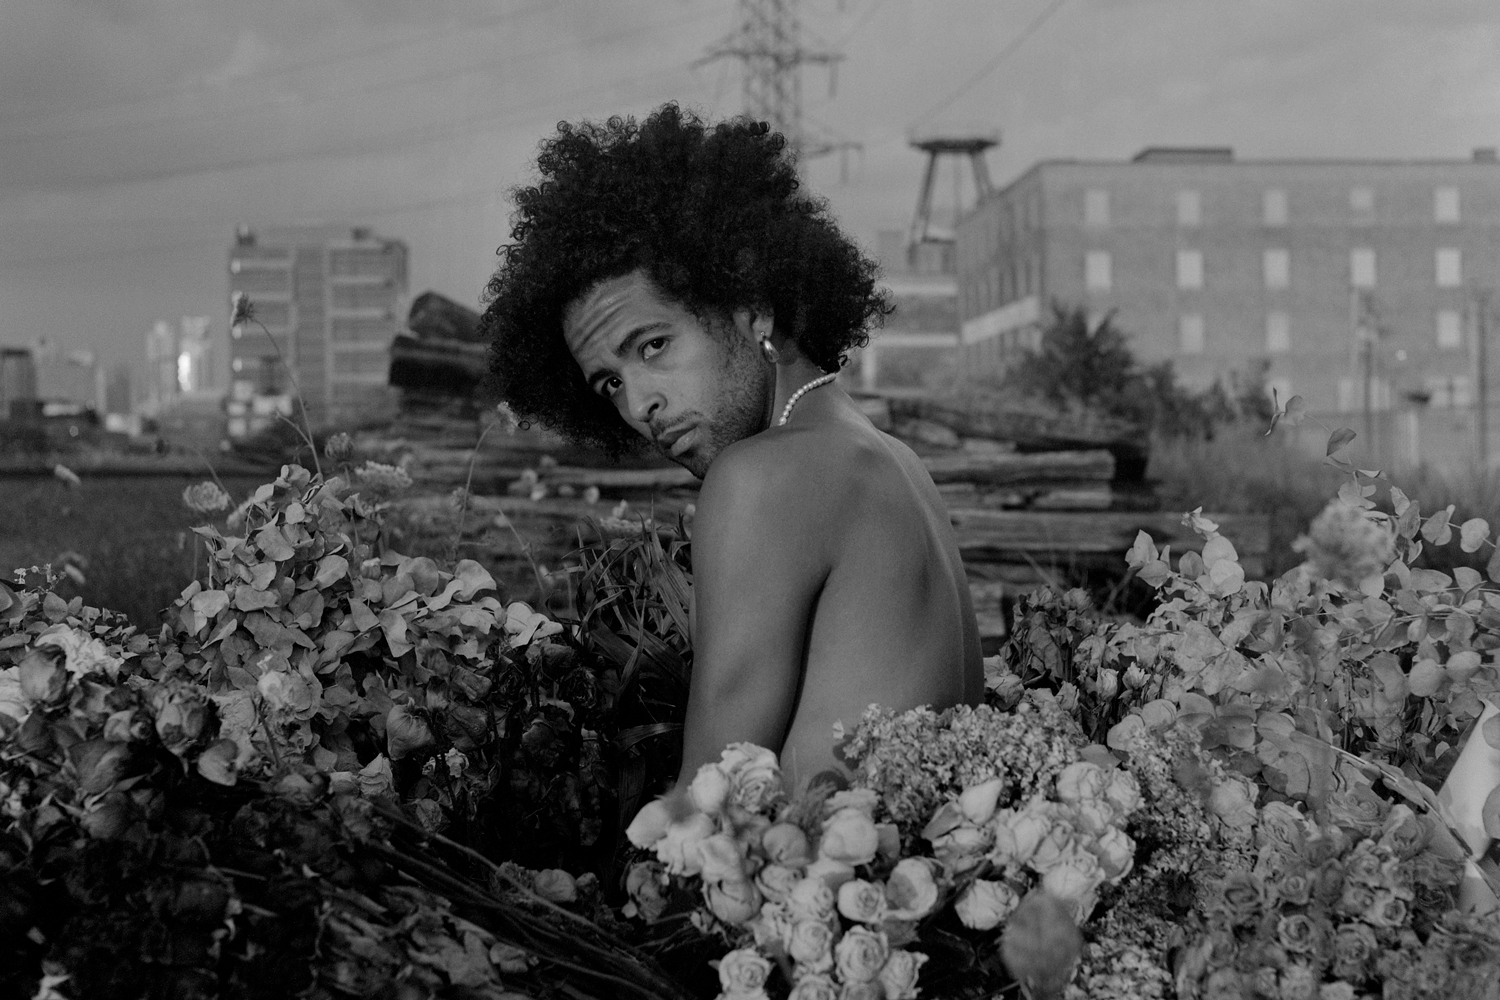 Image: A black-and-white portrait of Erol looking directly into the camera and sitting among dry flowers outdoors on an elevated train track. Buildings and a cloudy sky can be seen in the background. Photo by Ryan Edmund Thiel.